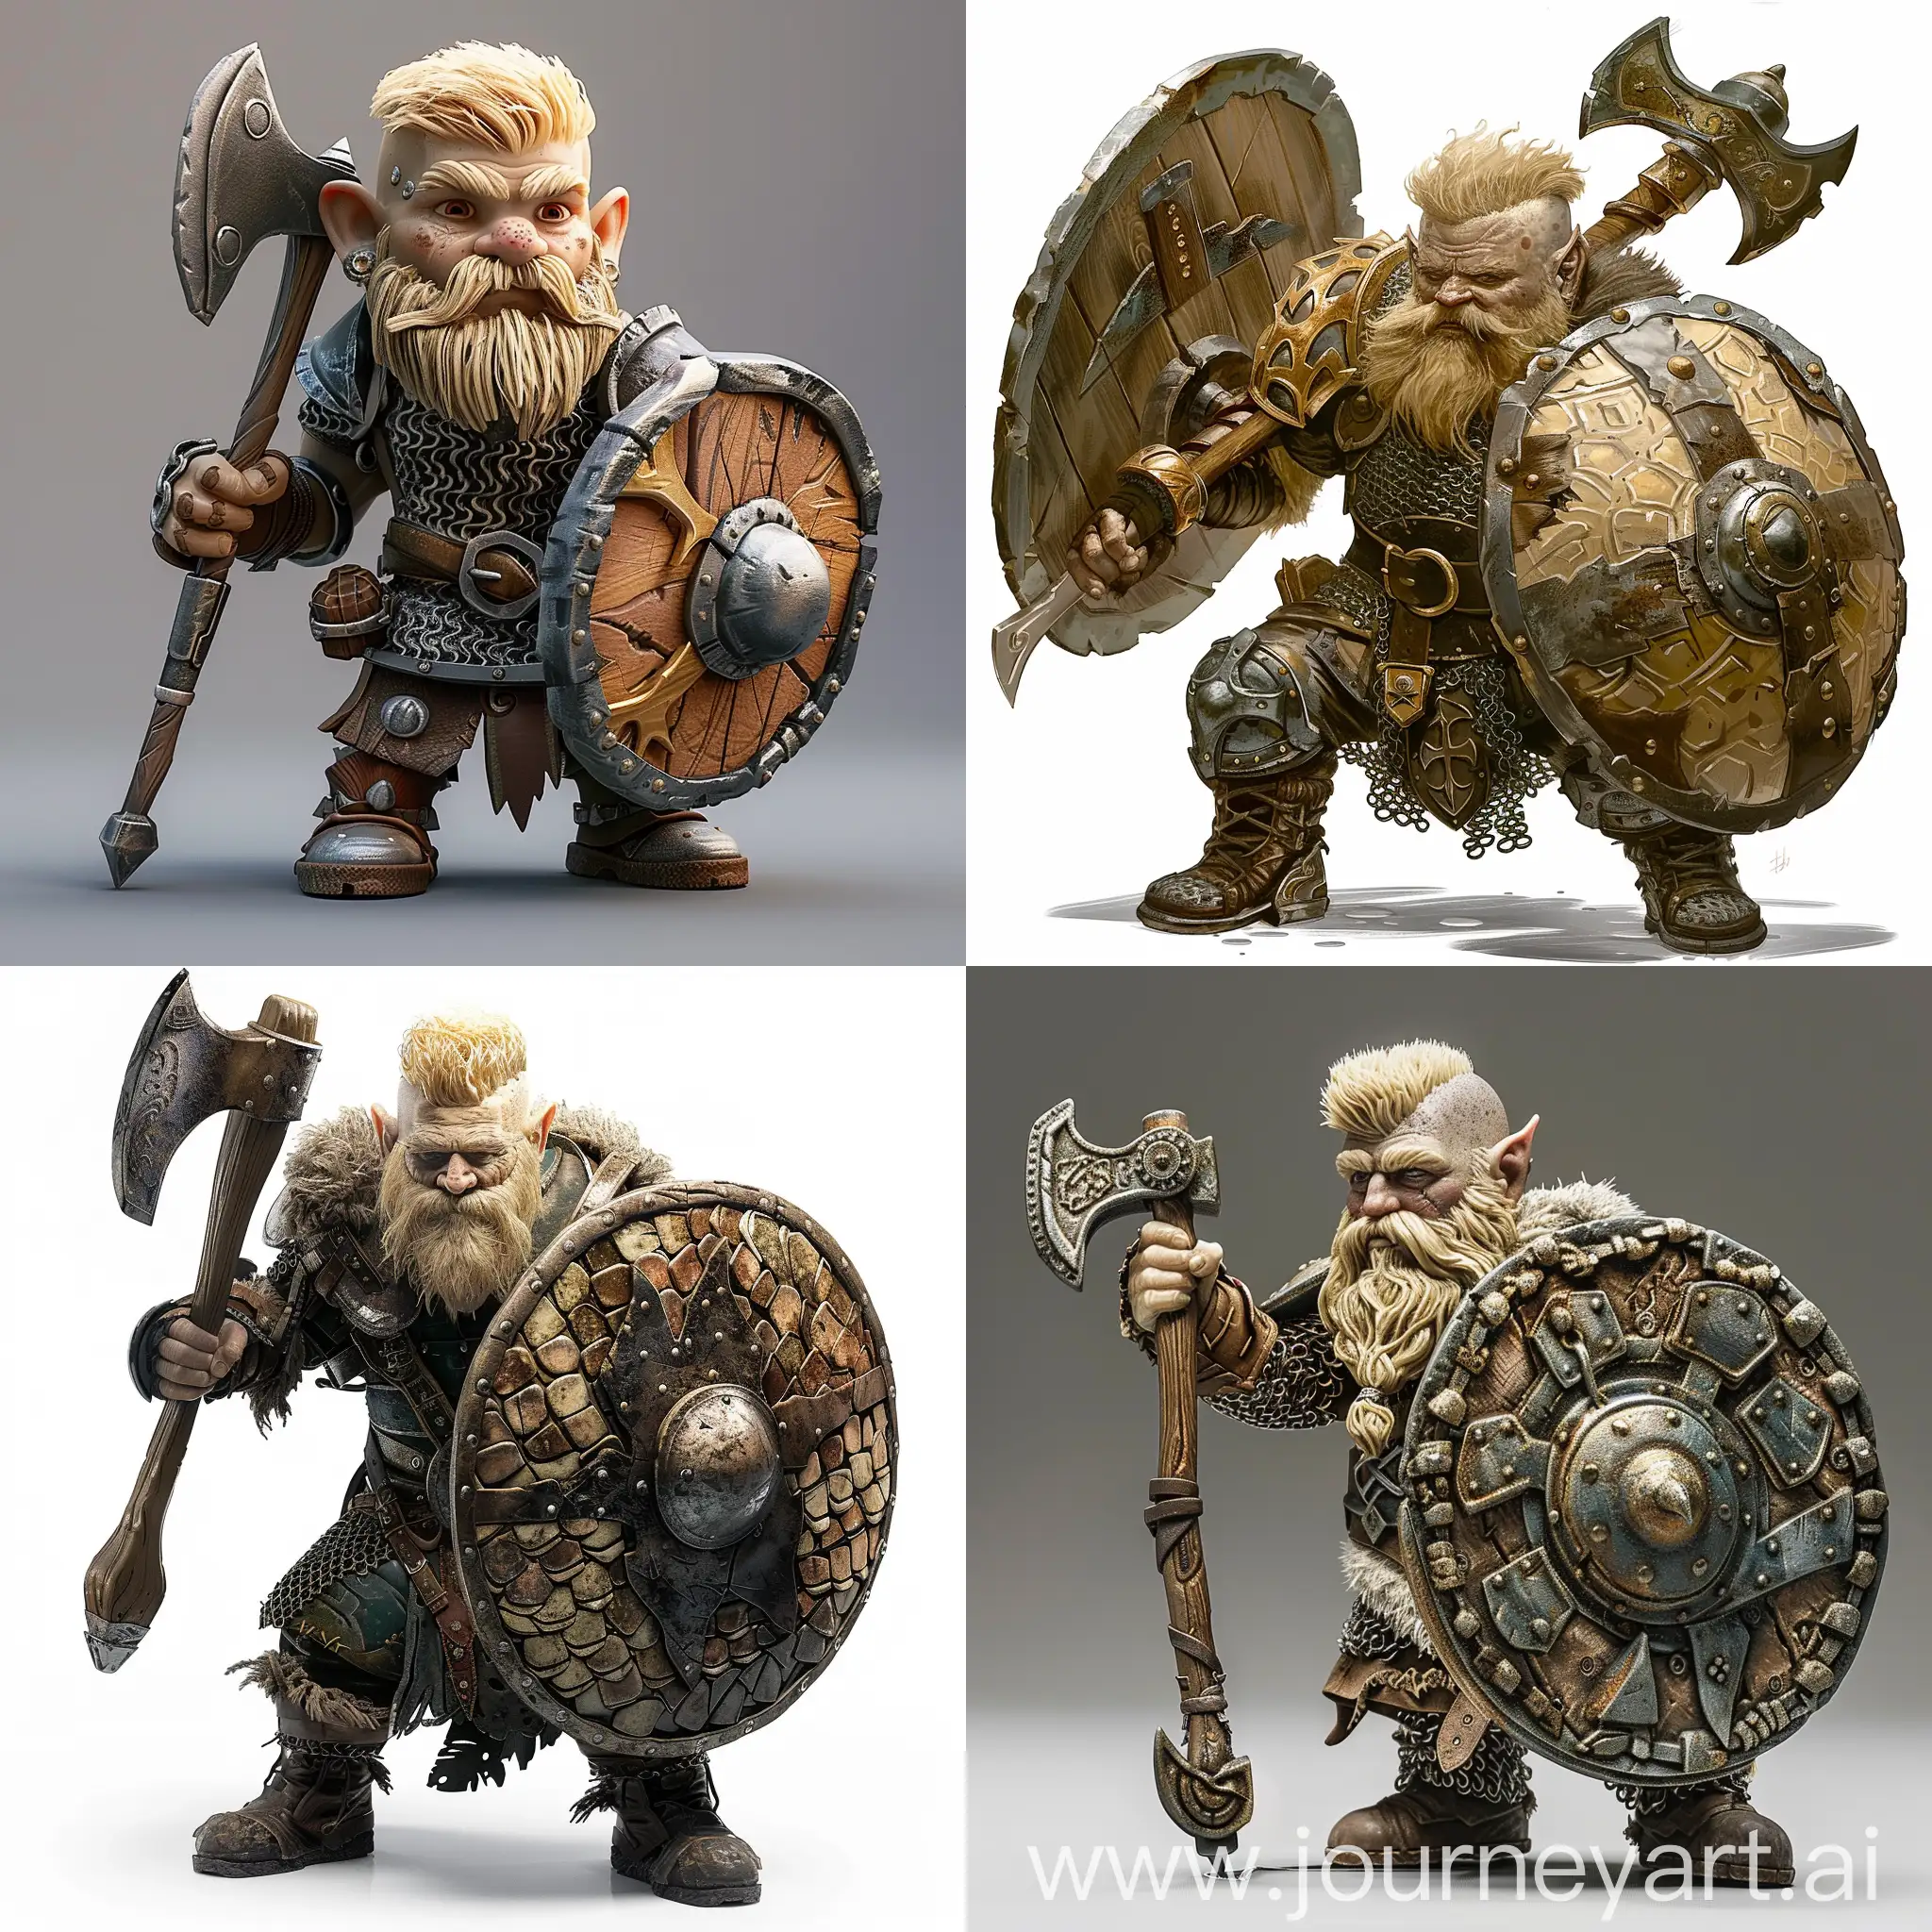 Dwarf with blonde short blonde hair and short beard wearing scalemail armor and wielding a large shield and war axe incredible detail fantasy